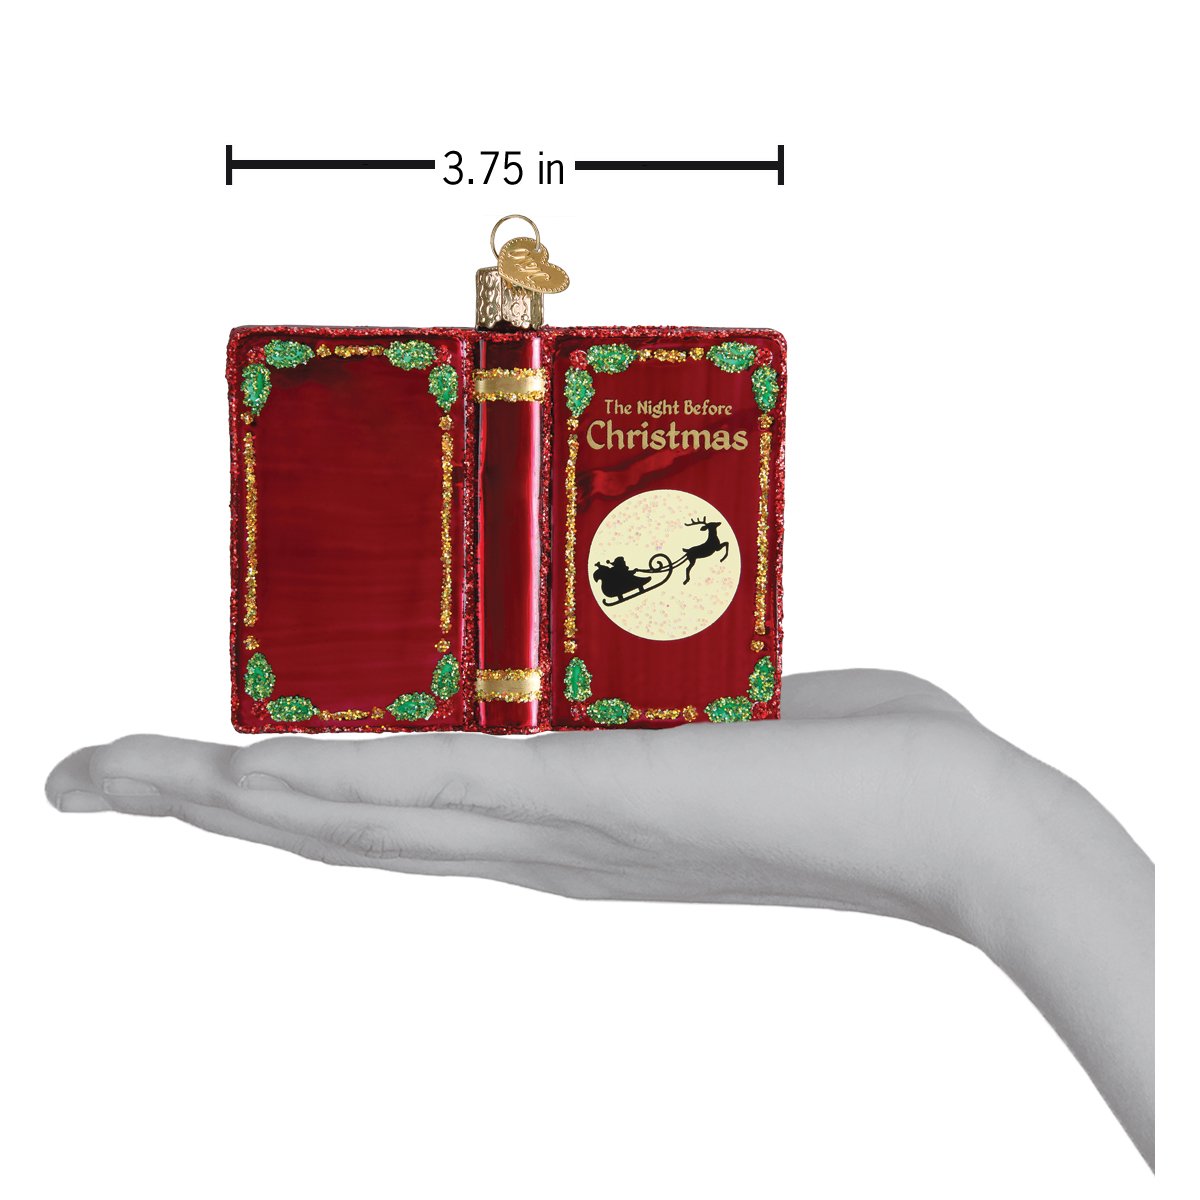 The Night Before Christmas Ornament